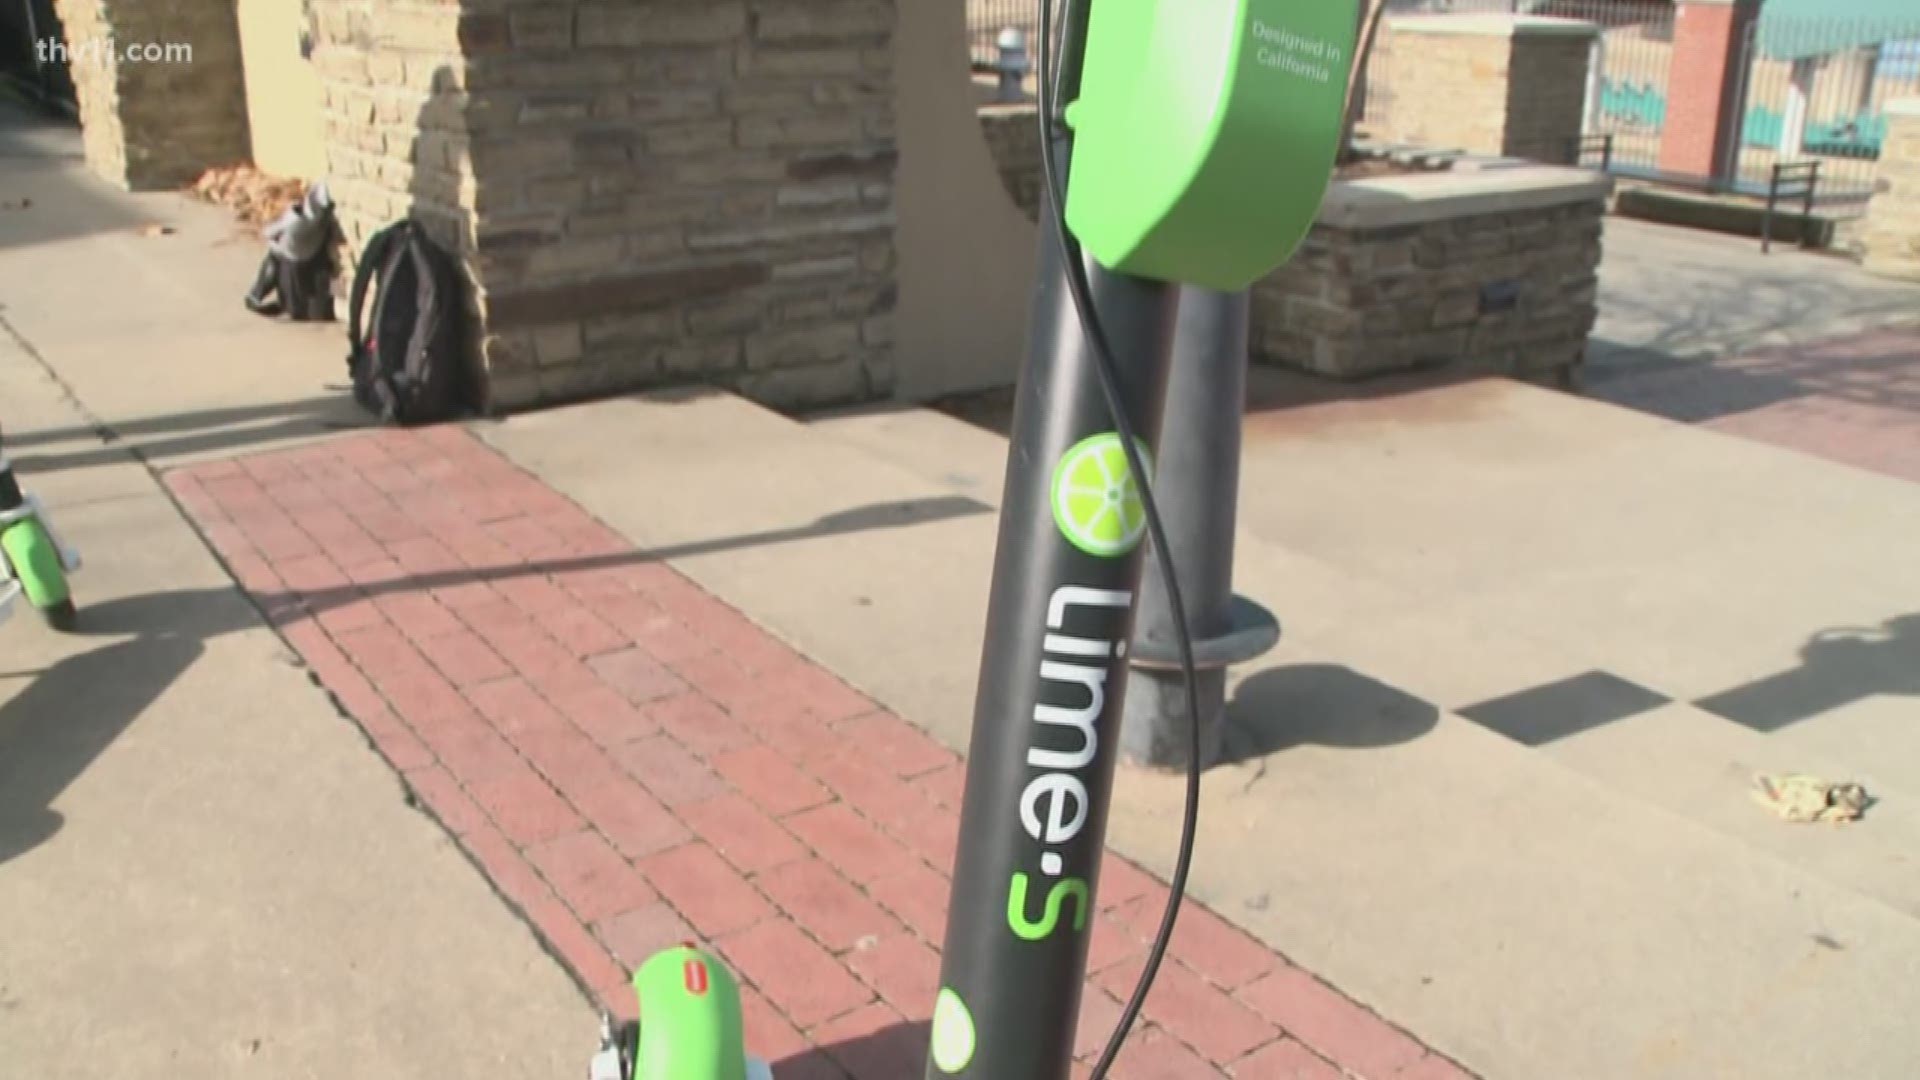 THE CITY OF LITTLE ROCK RECENTLY INTRODUCED ELECTRIC SCOOTERS TO ITS DOWNTOWN AREA IN HOPES OF HELPING PEOPLE GET AROUND EASIER.